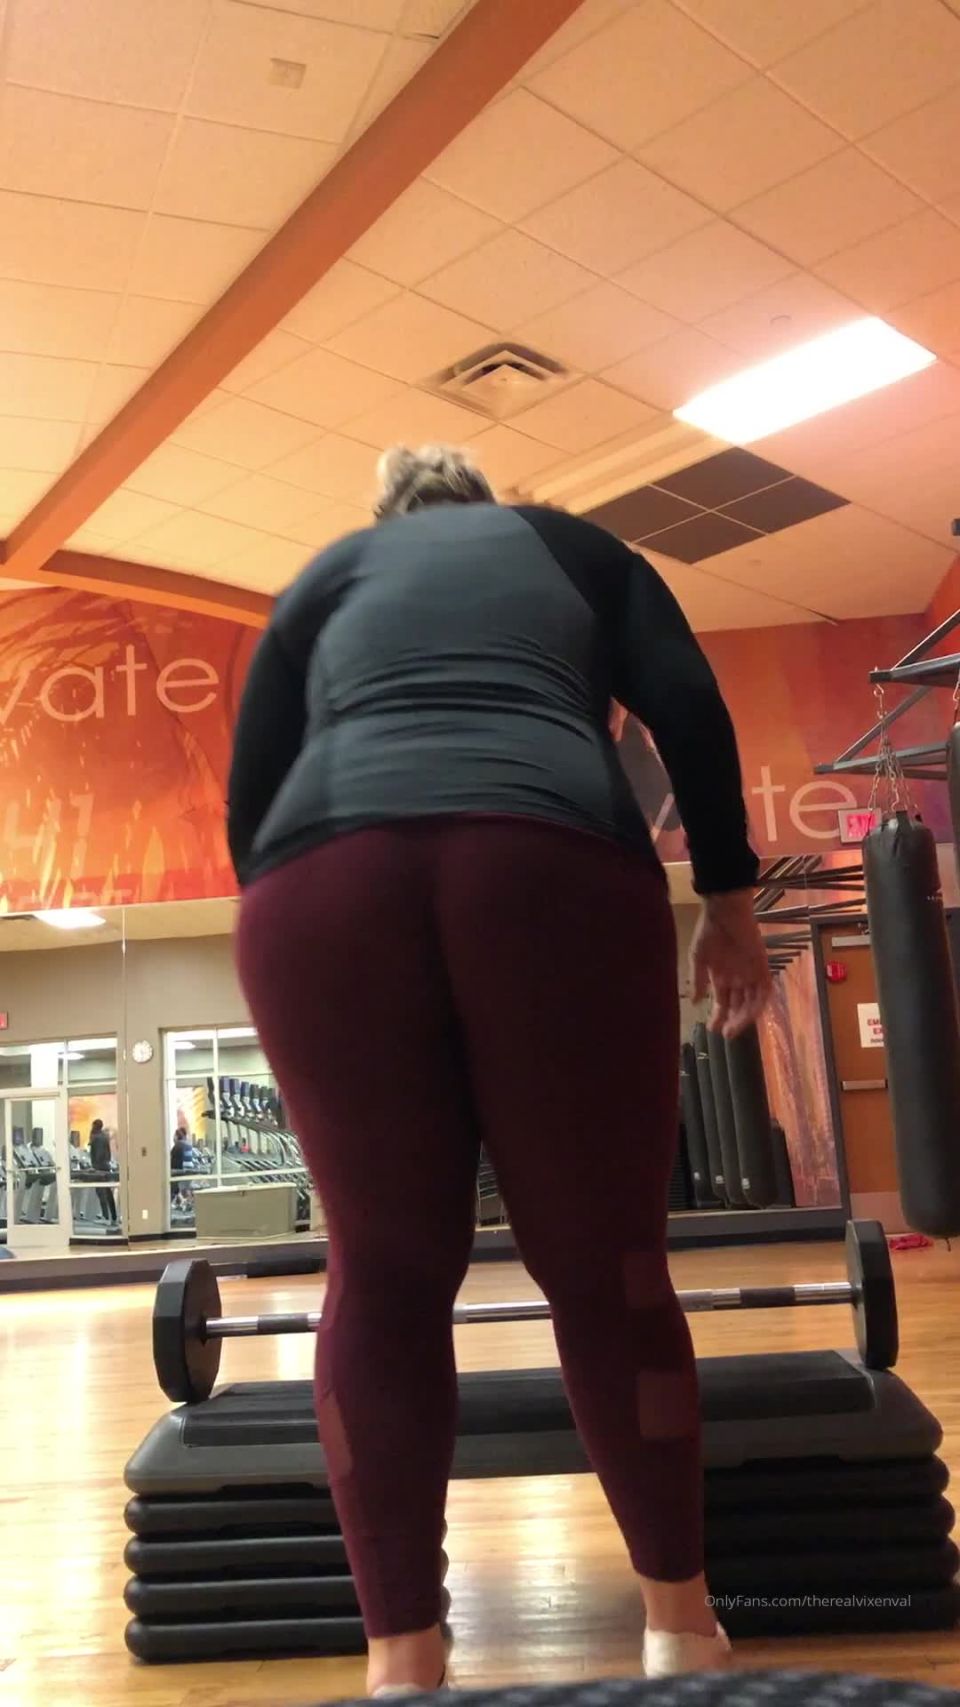 VixenVal (@therealvixenval) Who wants me to post more stuff from the gym 20-10-2019 - MILF